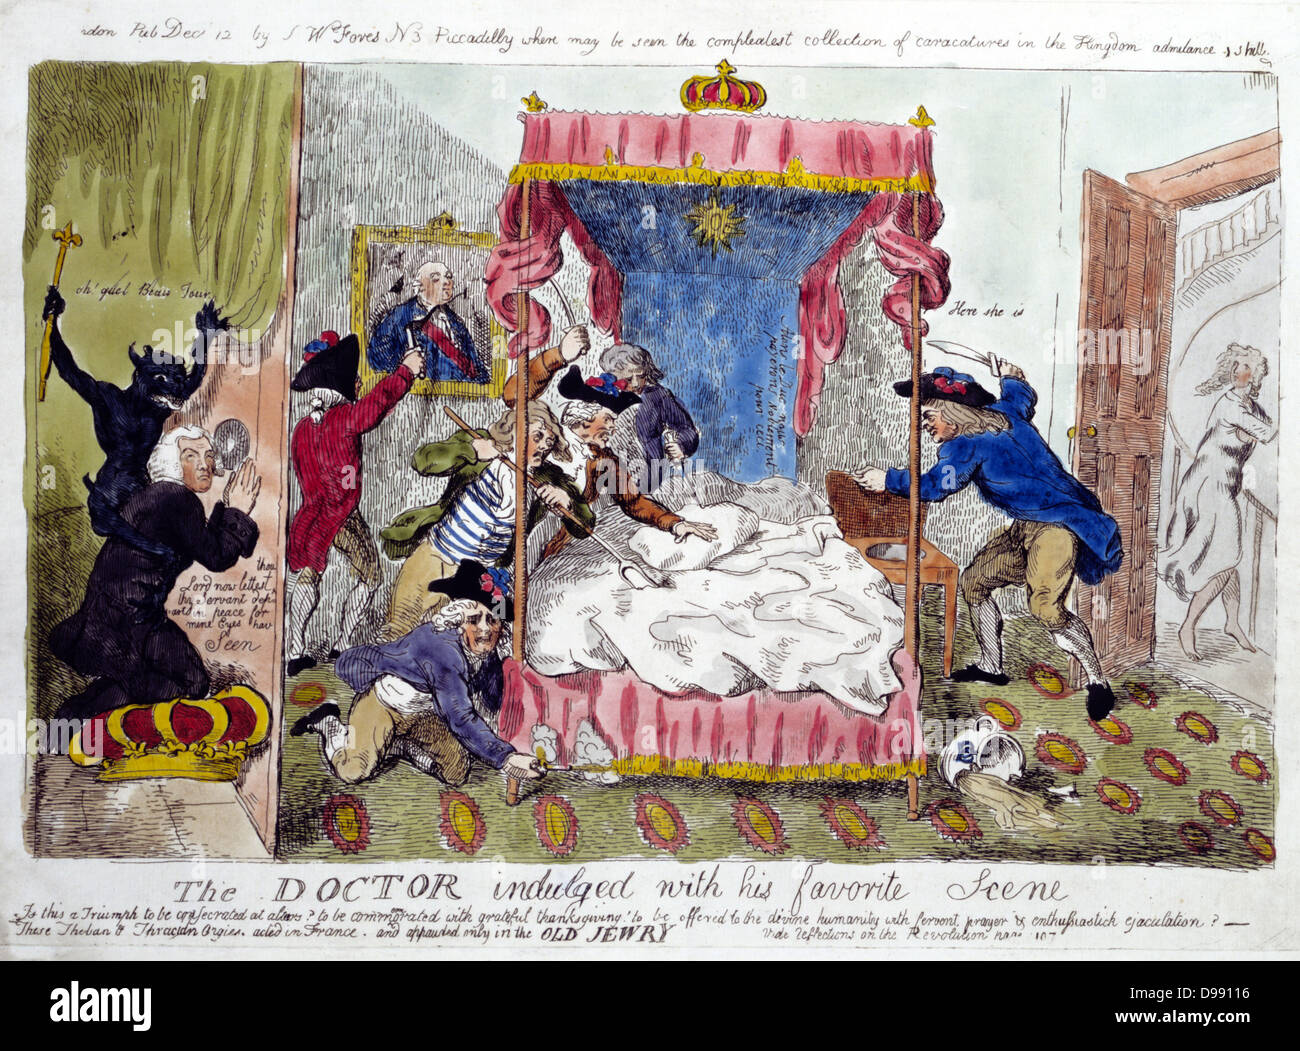 The Doctor indulged with his favourite Scene': Isaac Cruikshank c1790. Richard Price (1723-1791) Welsh philosopher, supporter of principles of French Revolution watching mob destroy Marie Antoinette's bed in search of her. Stock Photo